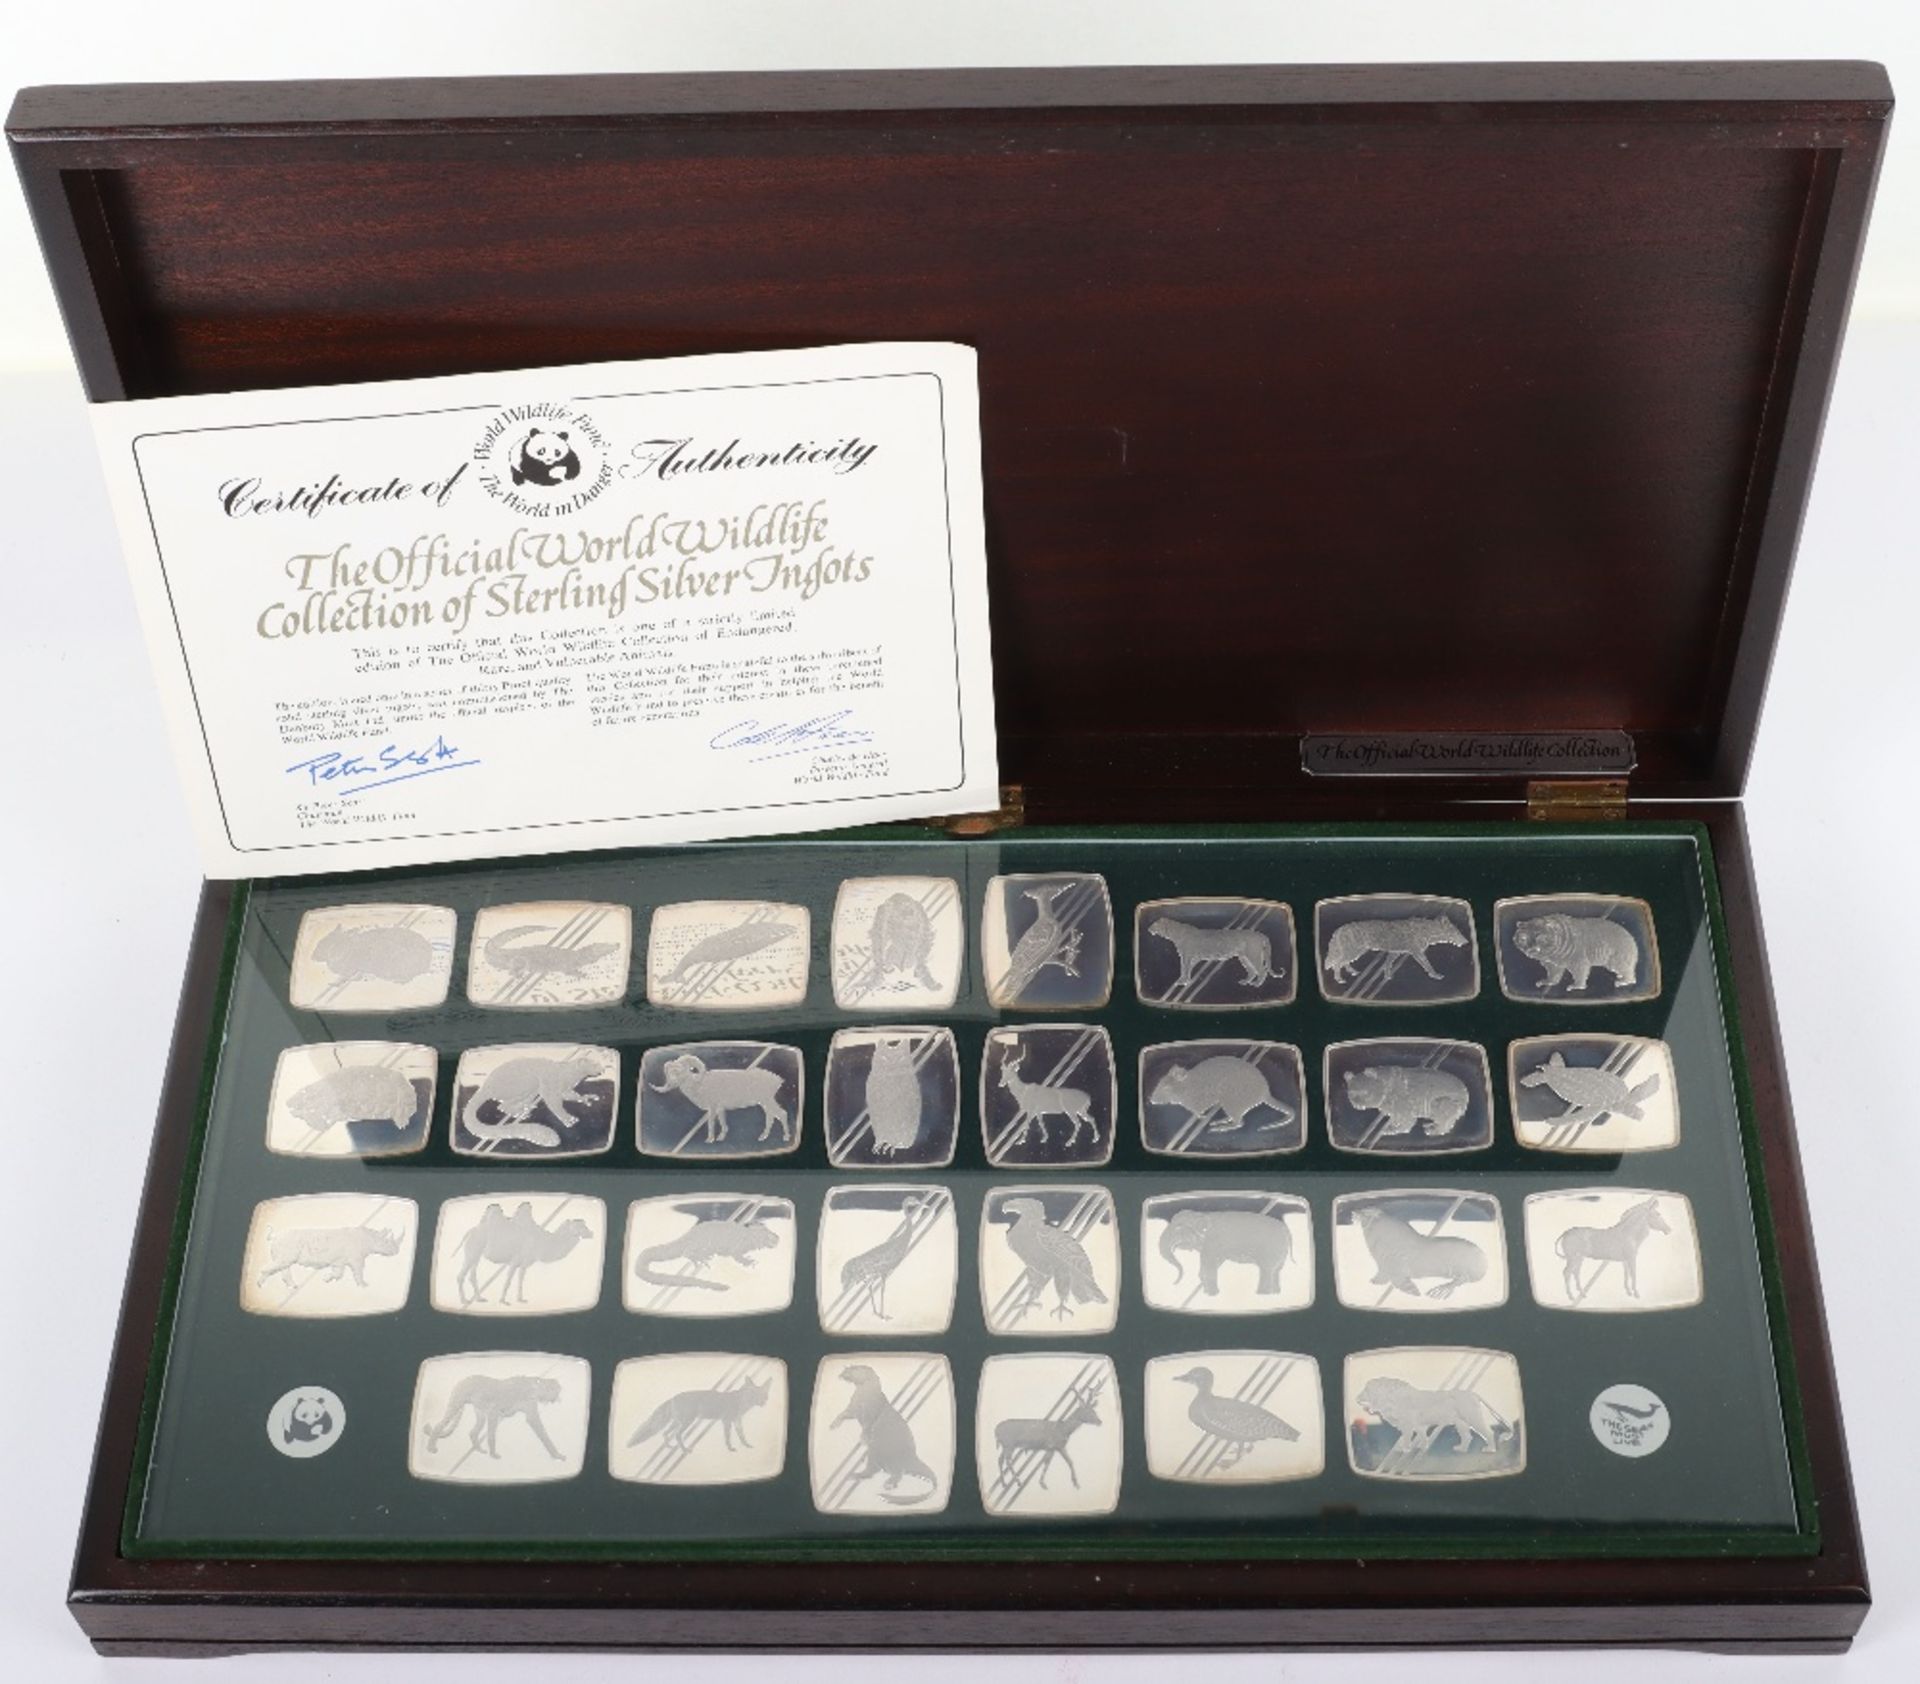 A set of thirty silver ingots, The Official World Wildlife Collection